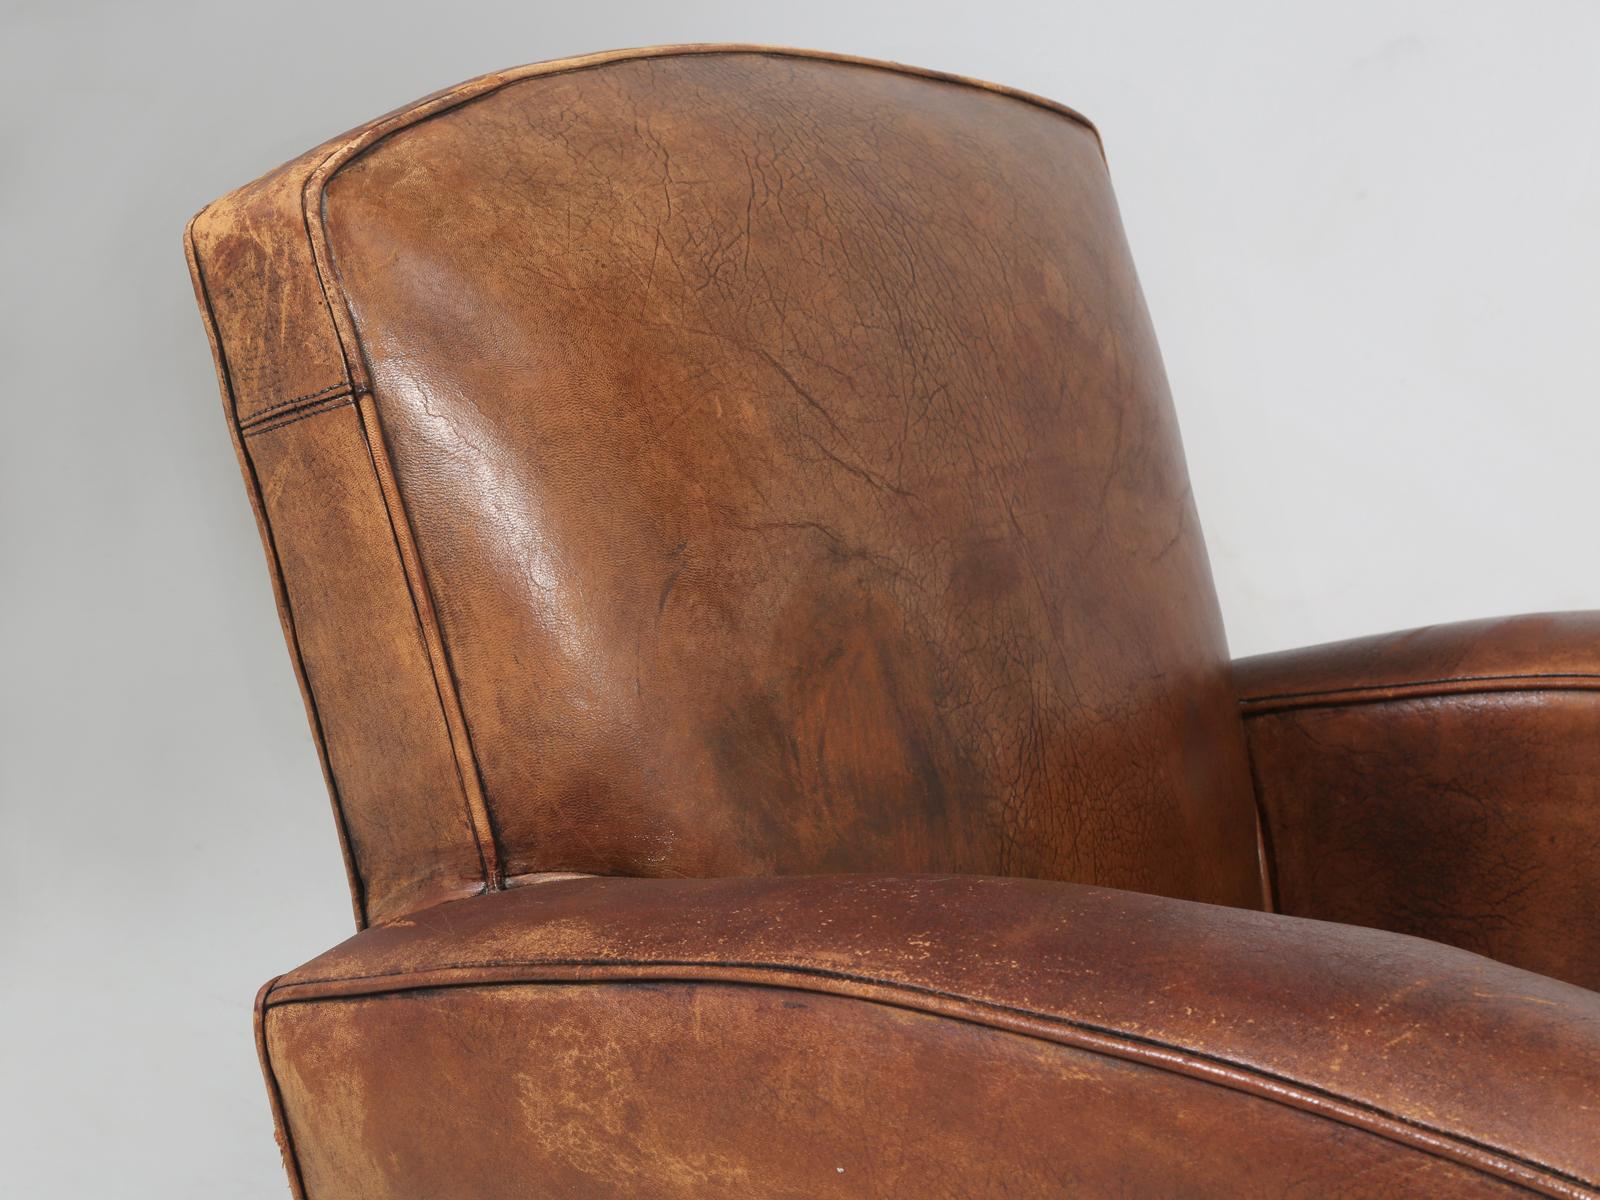 Art Deco French Leather Club Chair Restored Internally, but Kept Cosmetically Original